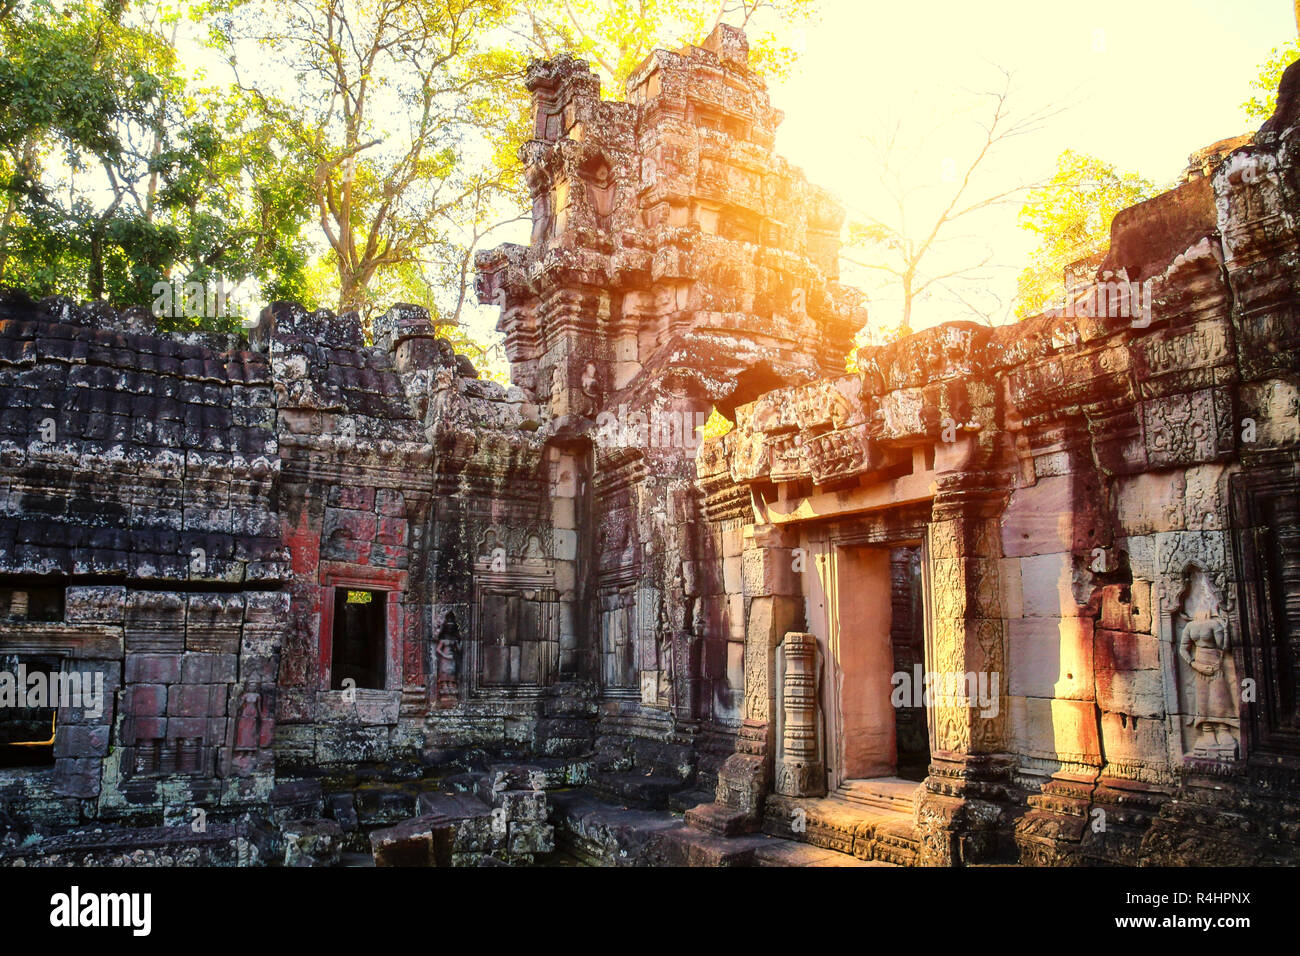 Banteay Kdei temple is Khmer ancient temple in complex Angkor Wat in Siem Reap, Cambodia in a summer day Stock Photo